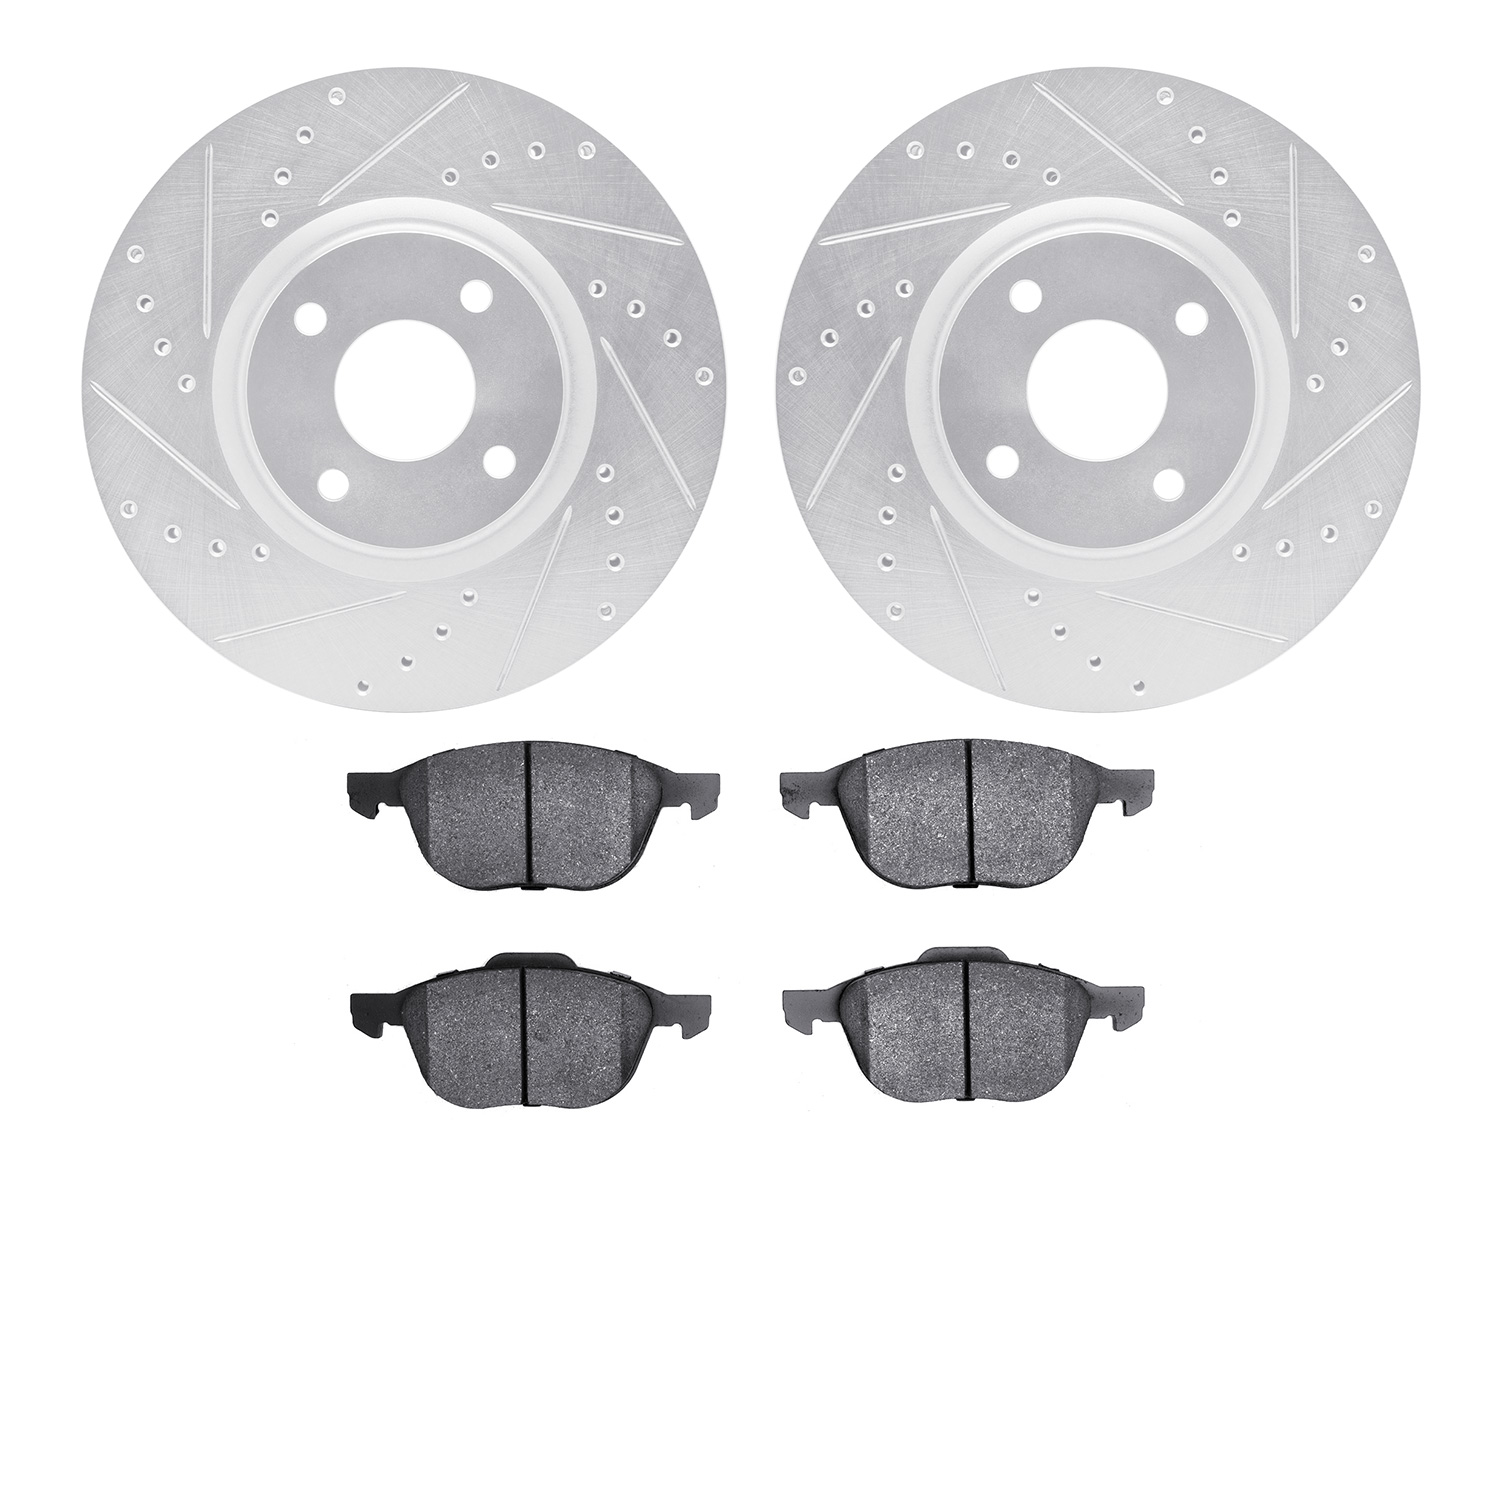 7502-54099 Drilled/Slotted Brake Rotors w/5000 Advanced Brake Pads Kit [Silver], Fits Select Ford/Lincoln/Mercury/Mazda, Positio